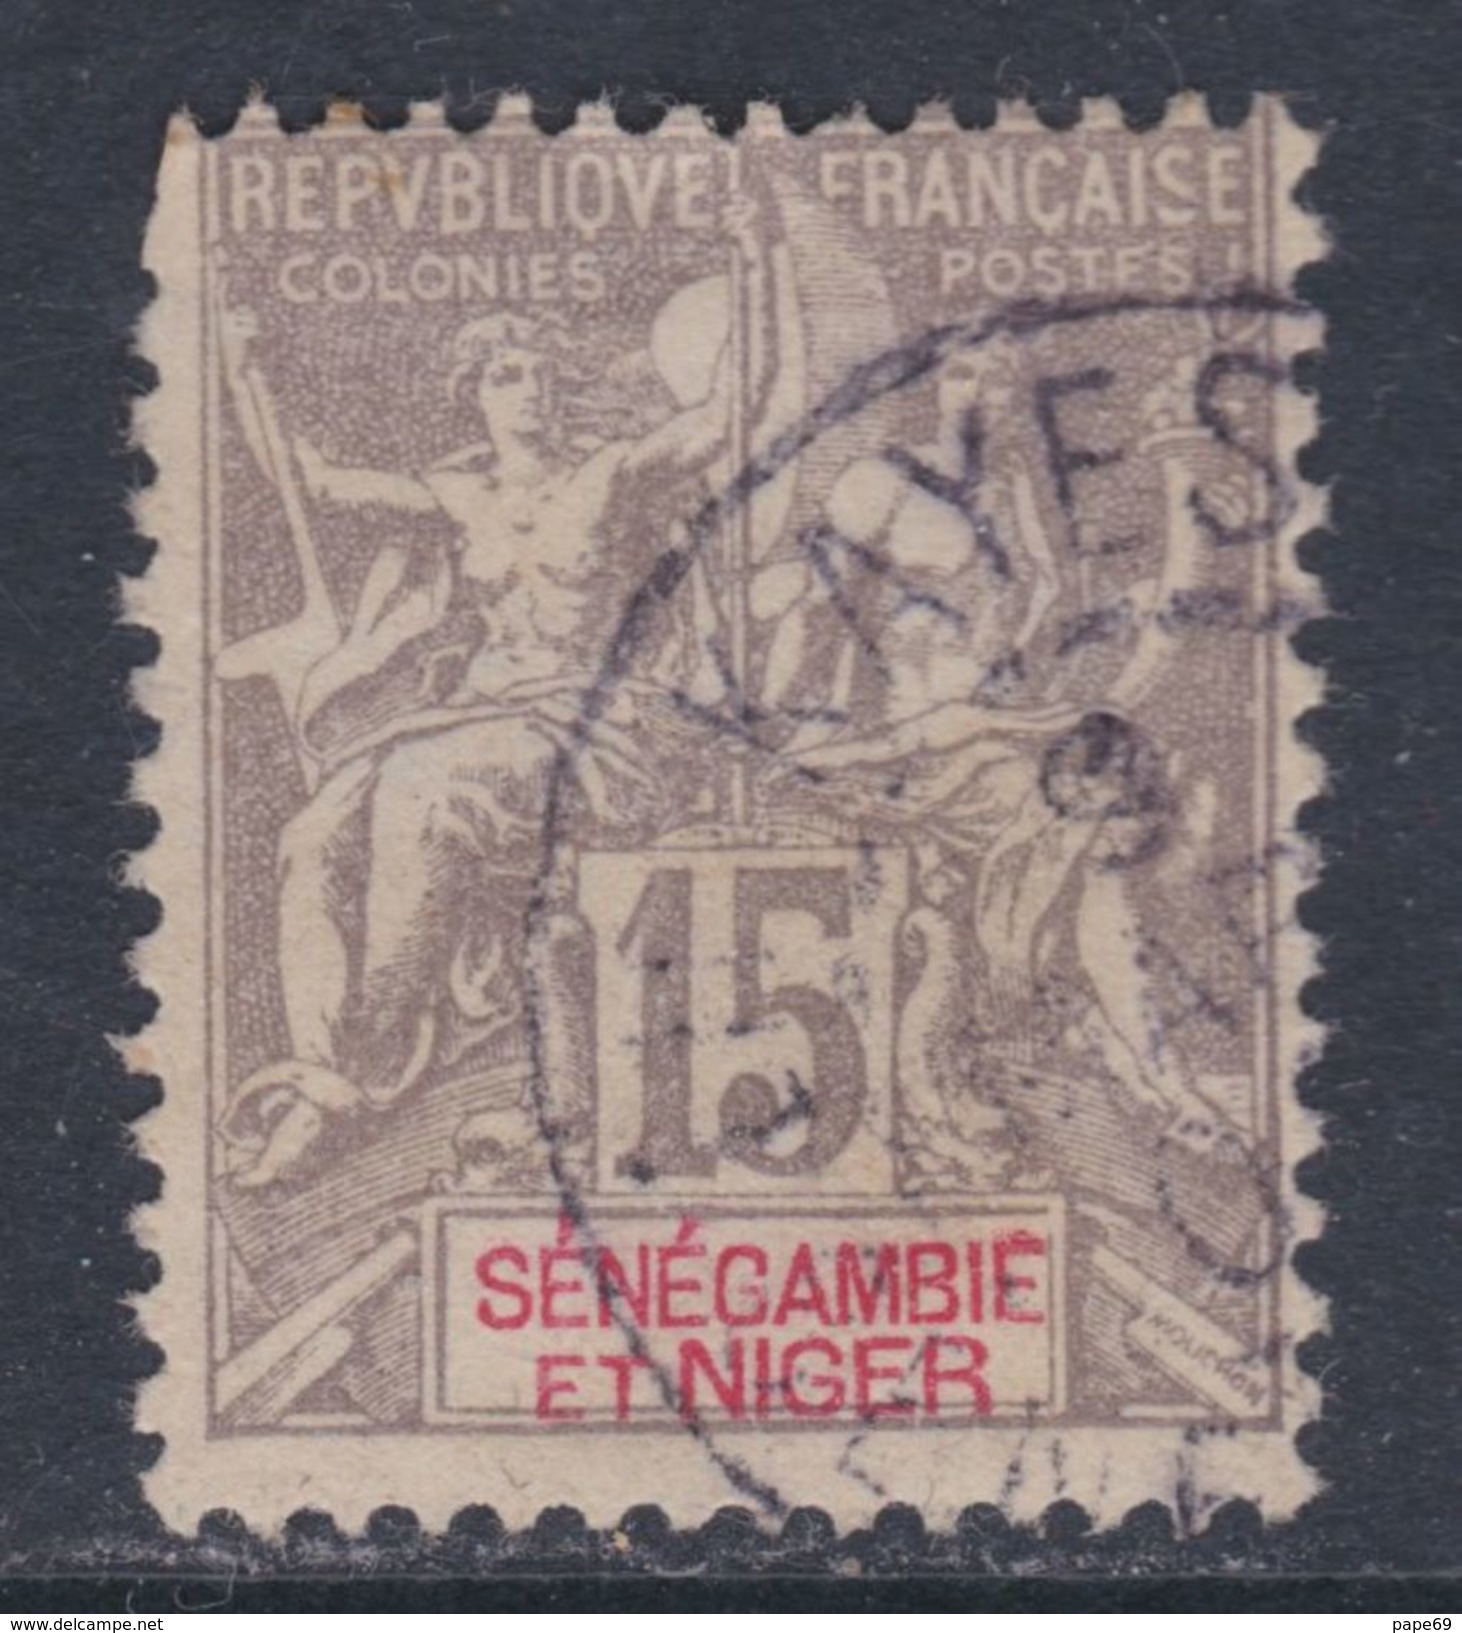 Sénégambie Et Niger N° 6 O Type Groupe : 15 C. Gris, Oblitération Moyenne Sinon TB - Used Stamps